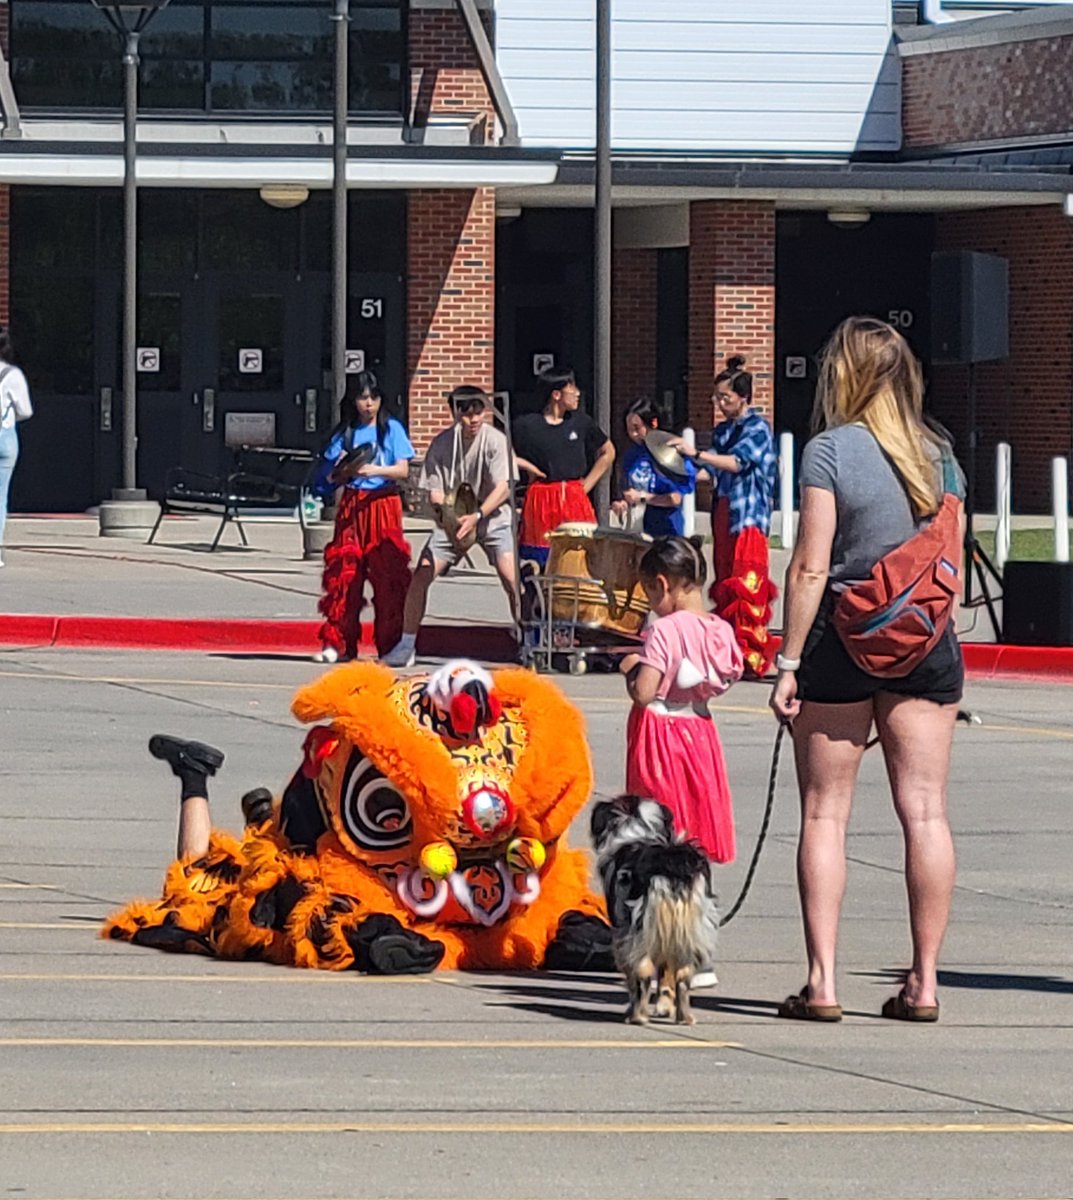 Lion dance at the 2nd annual ICT Culture Festival on Saturday at South High  #wichitaks #shsMCLA #wichitaevents